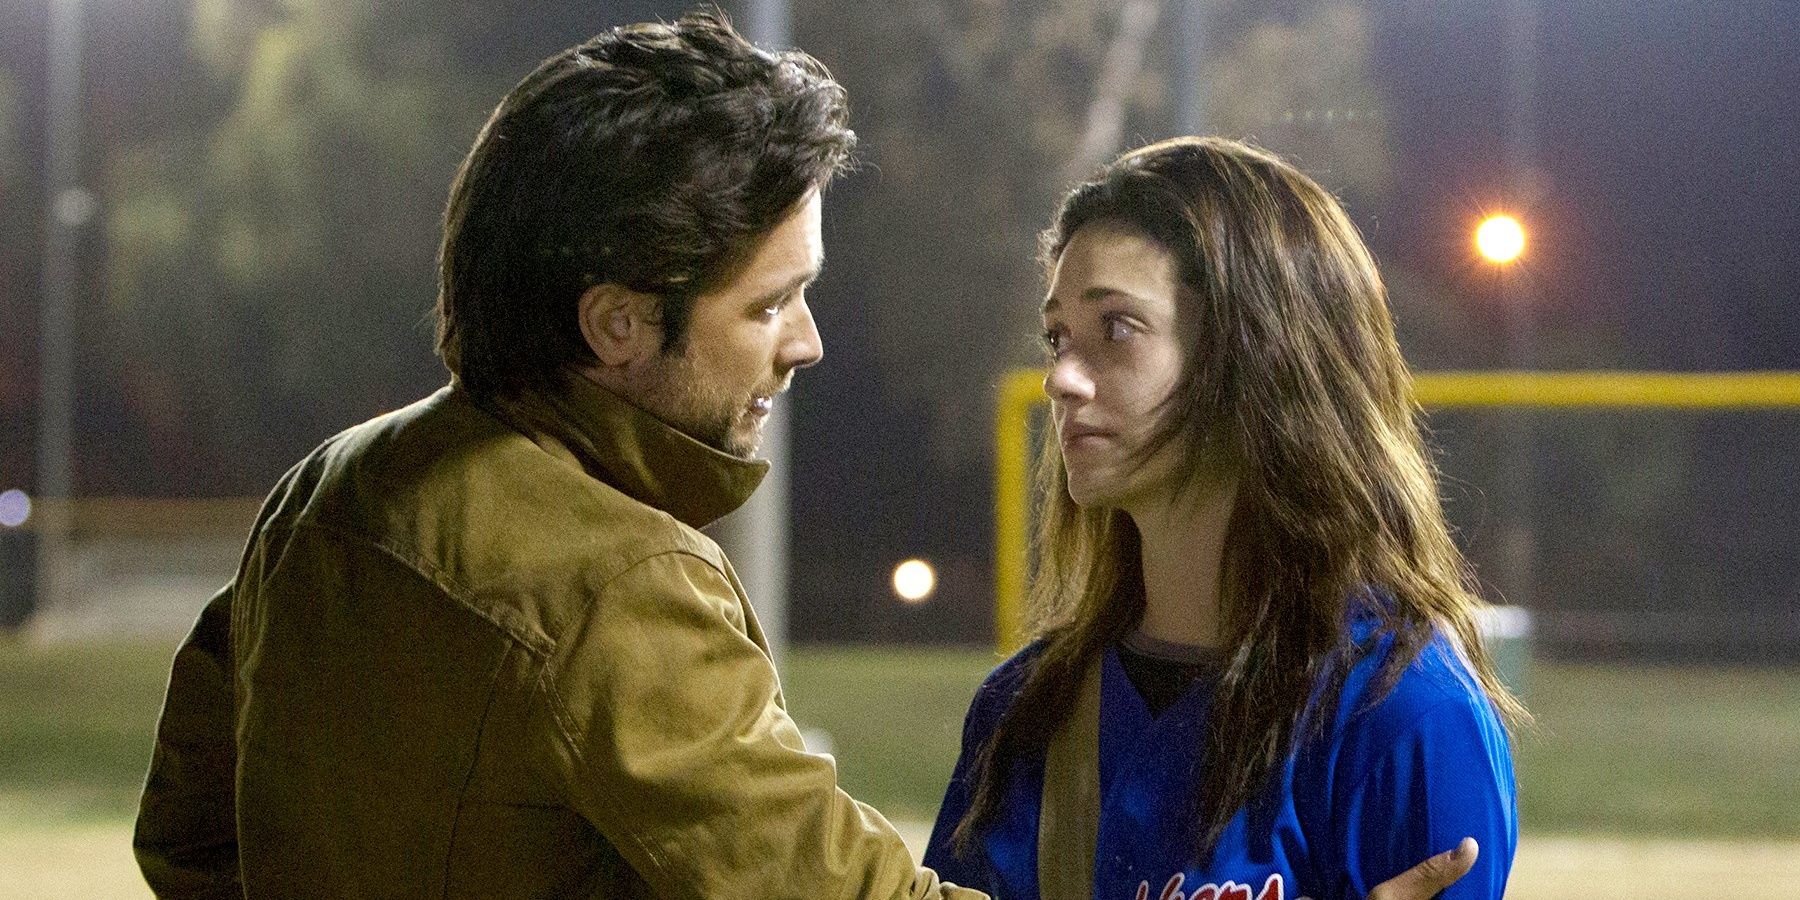 Jimmy from Shameless talks to Fiona at a football field